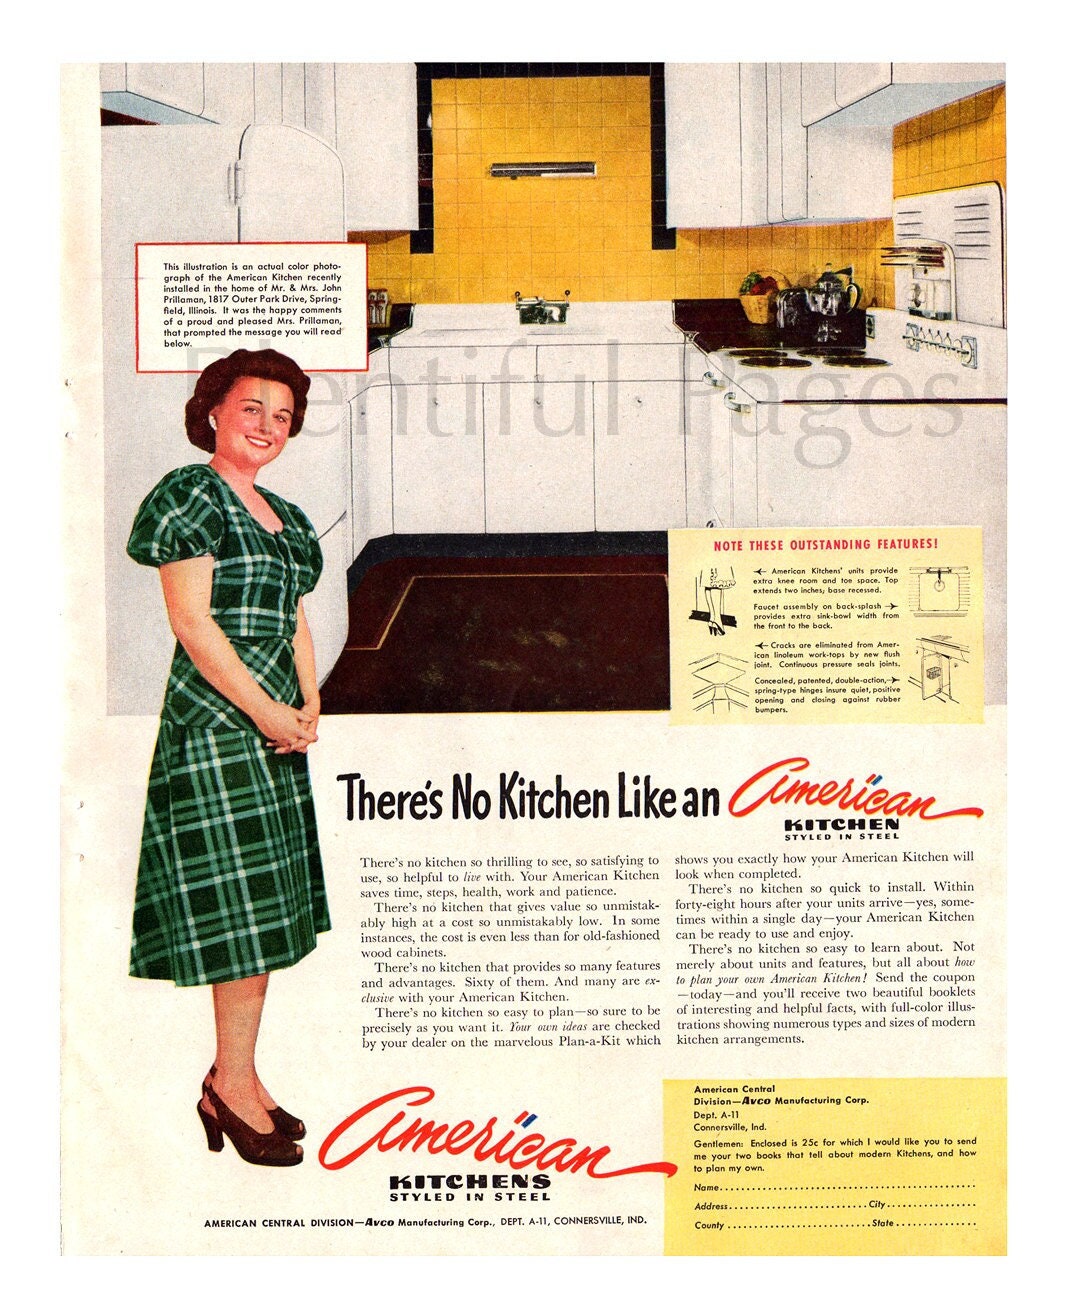 1947 American Kitchens Vintage Ad 1940s Housewife